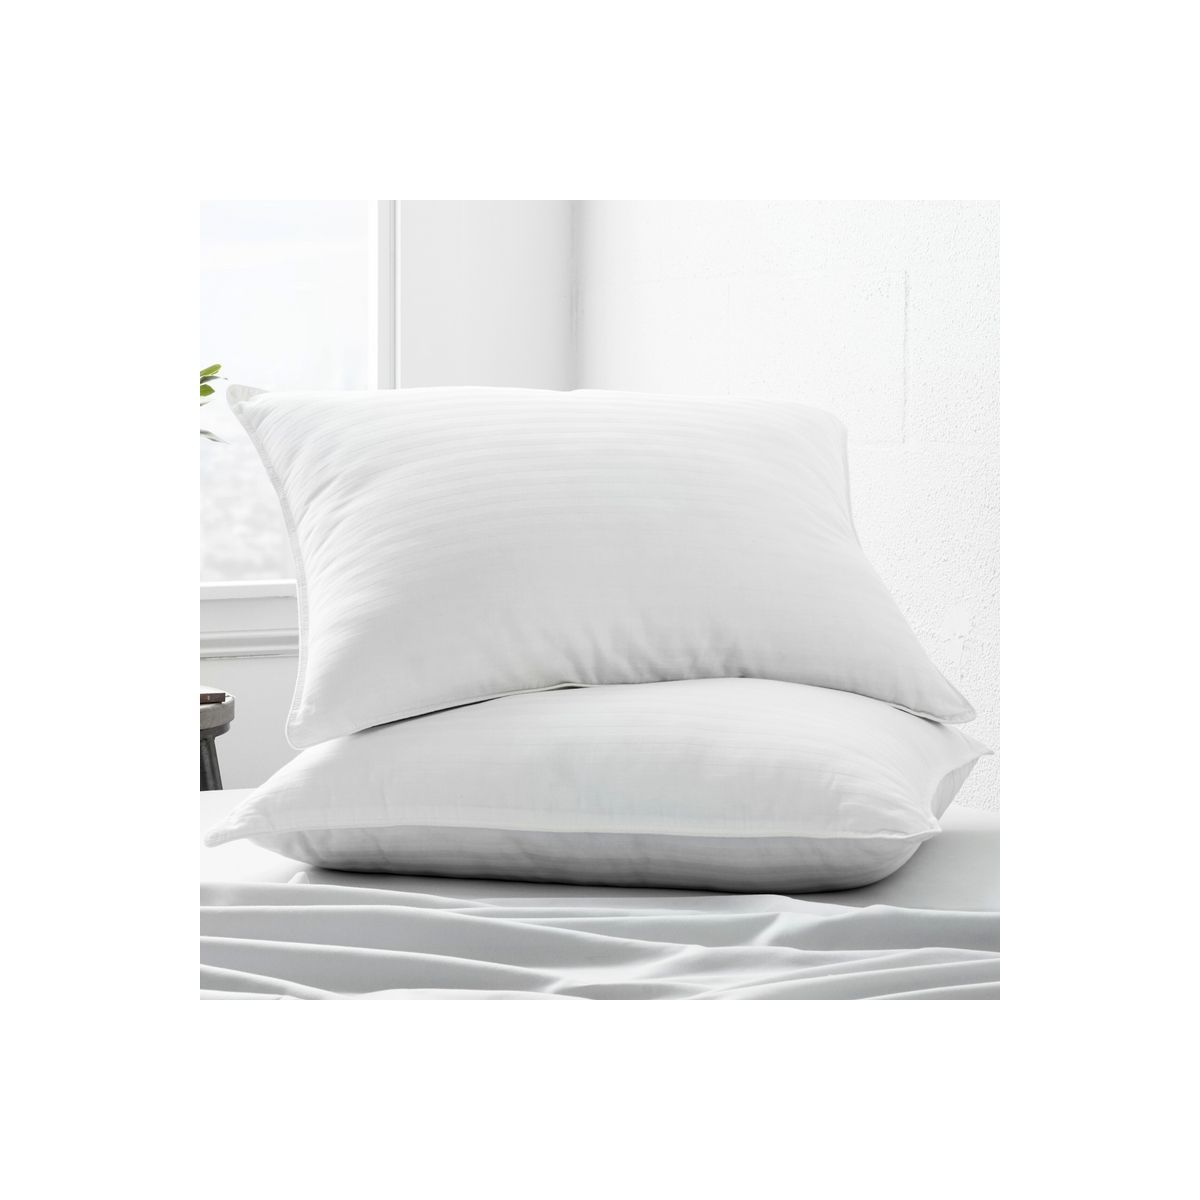 Set of 2 Cooling Gel Fiber Bed Pillows With 100% Cotton Cover - Becky Cameron, White, King | Target